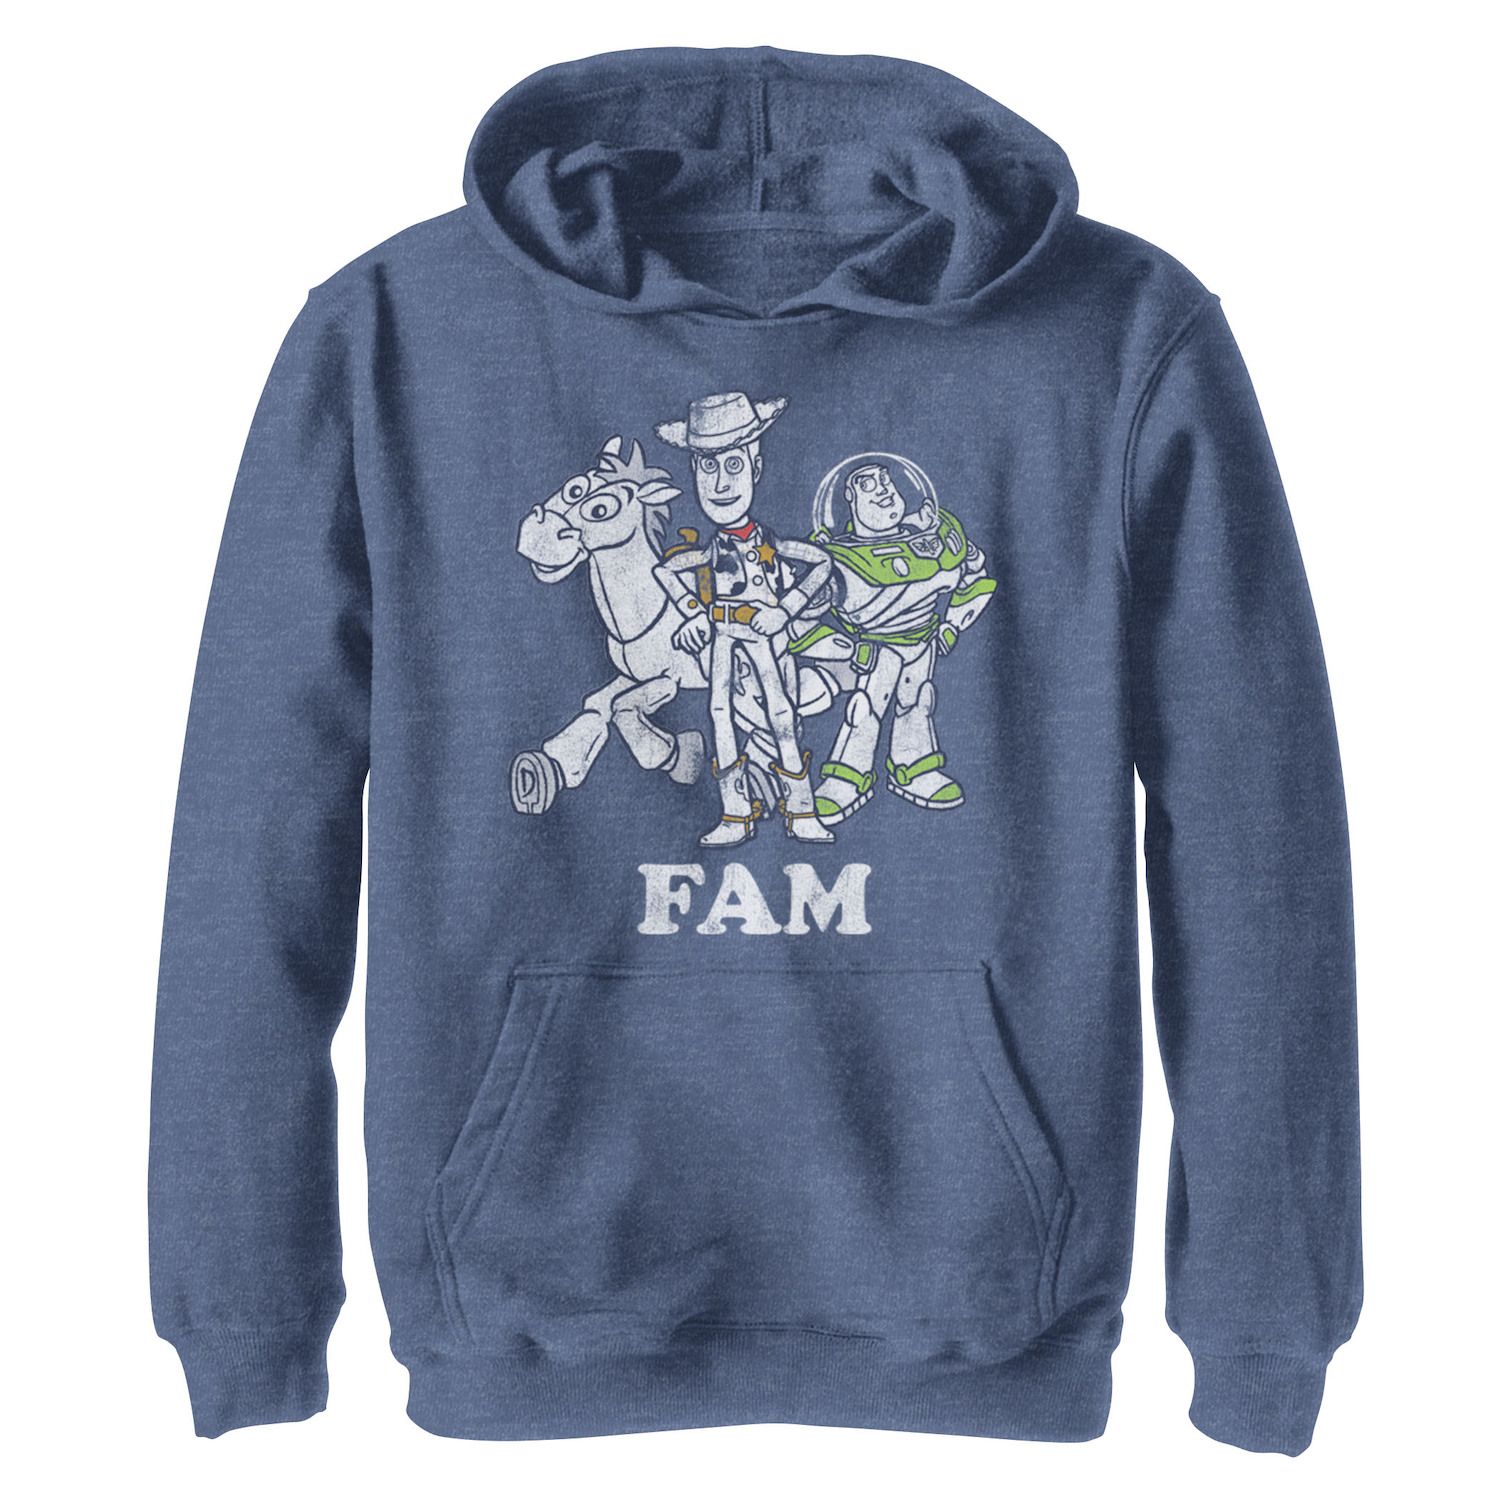 Image for Disney / Pixar 's Toy Story Boys 8-20 Buzz and Woody Family Graphic Fleece Hoodie at Kohl's.